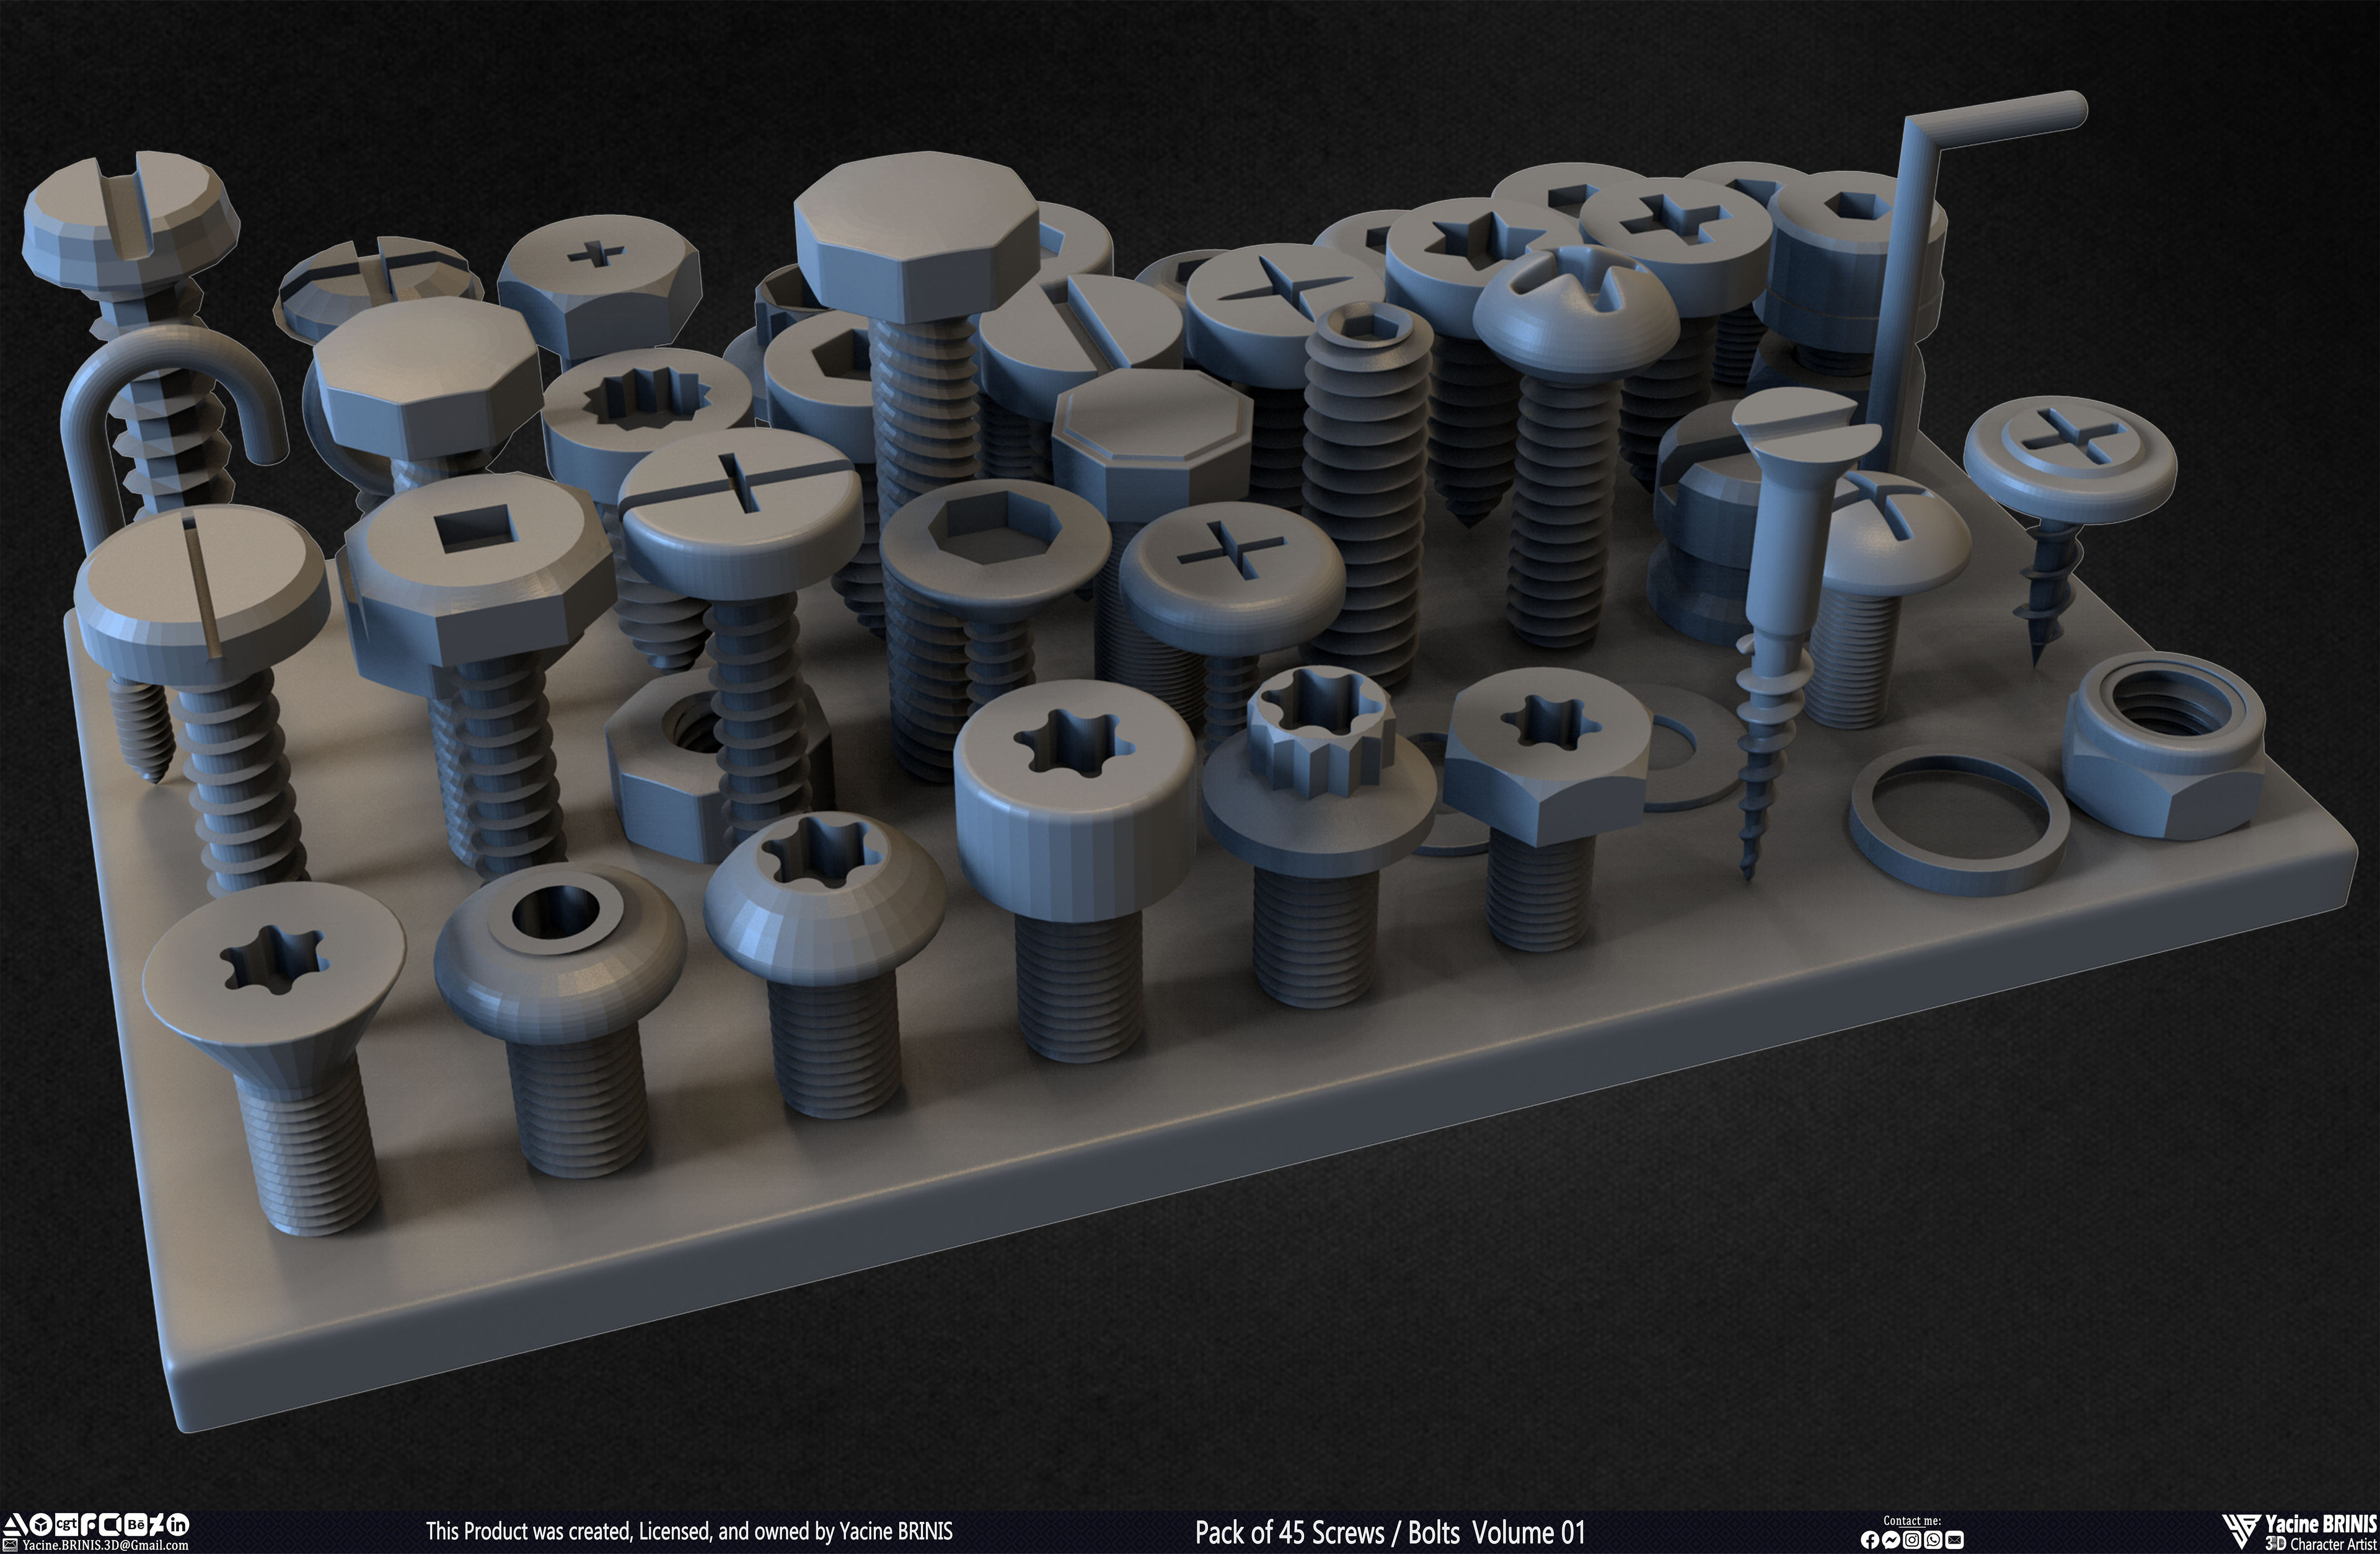 Pack of 45 Screws-Bolts Volume 01 Sculpted By Yacine BRINIS Set 013